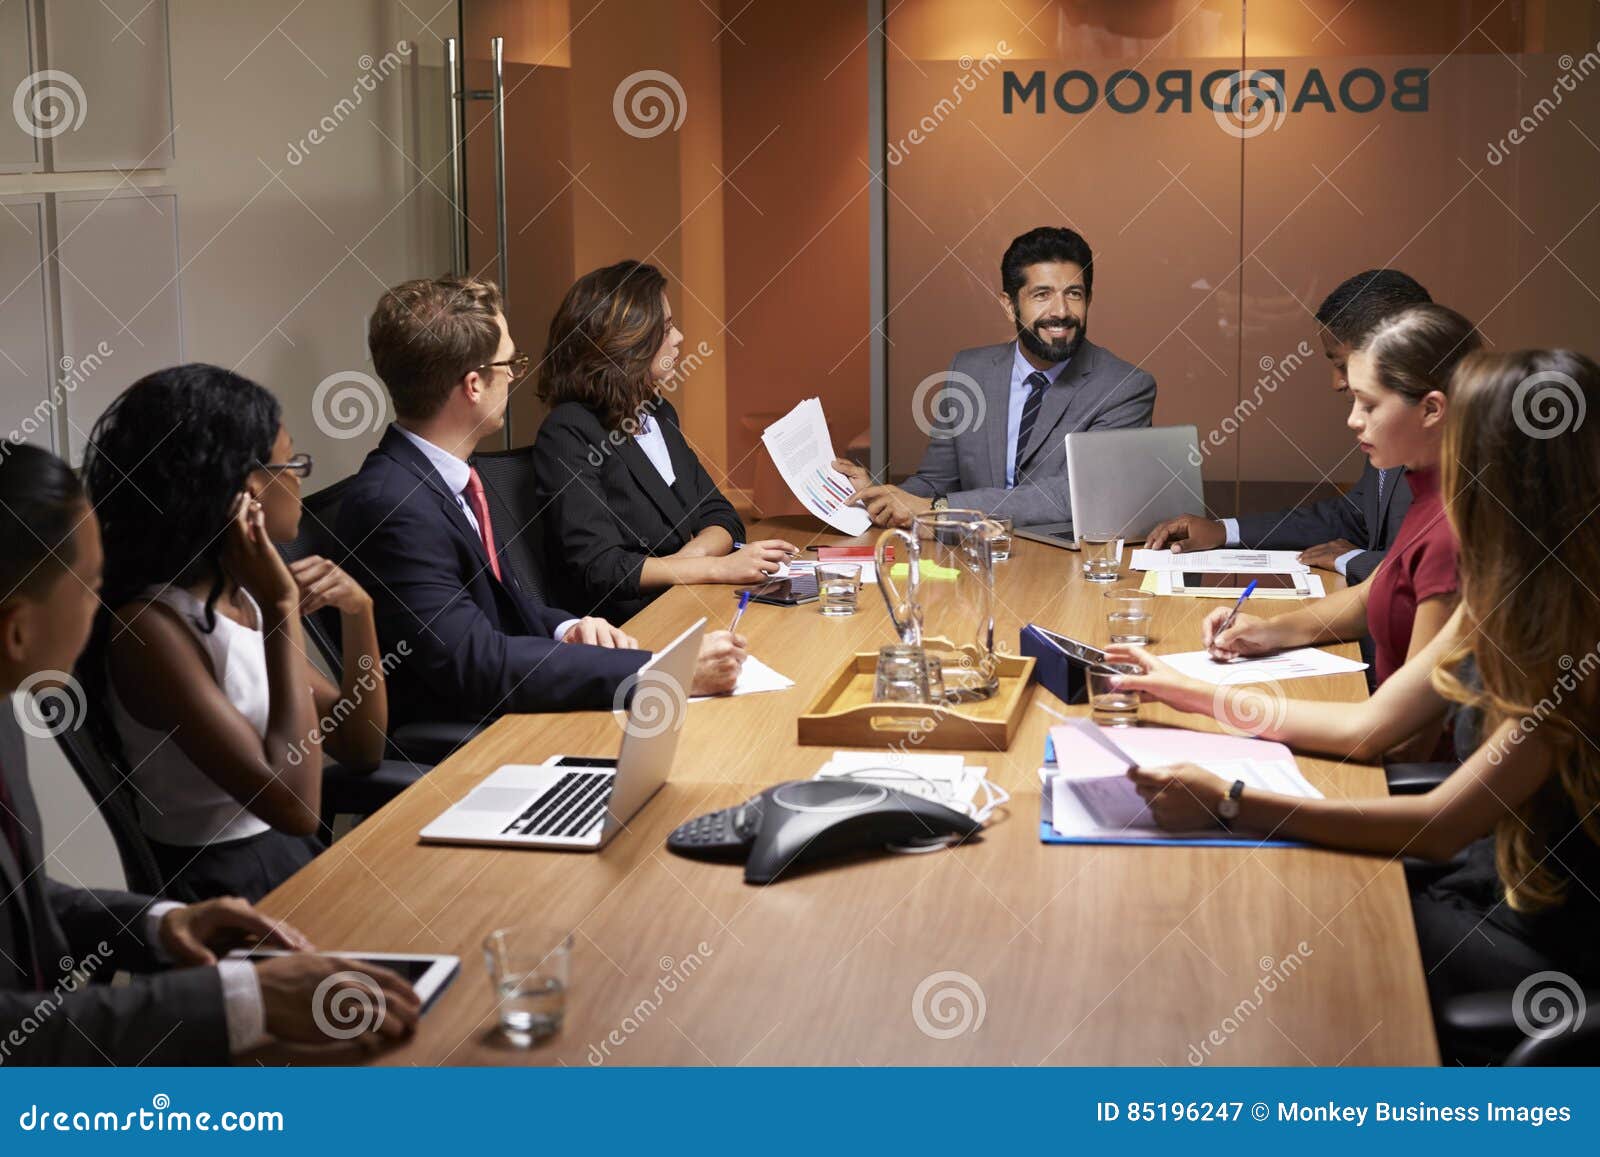 Corporate Business People At An Evening Boardroom Meeting